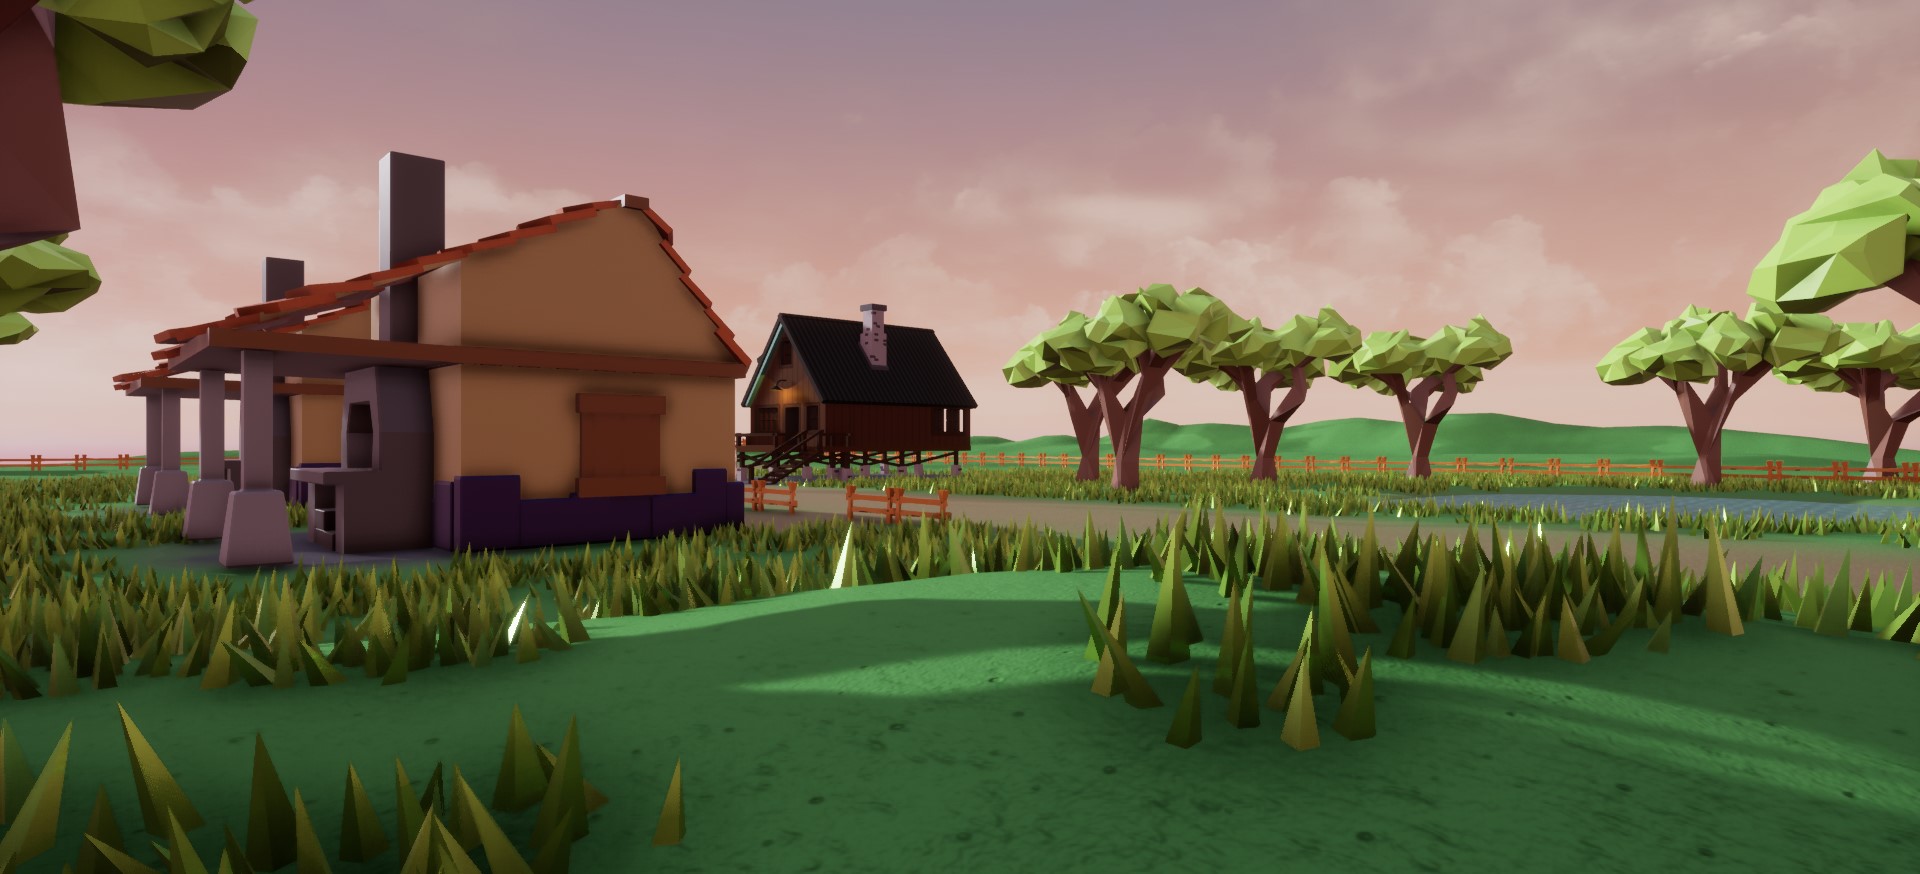 BSc Games Development work by Joshua Brinton, featuring a vibrant town level.